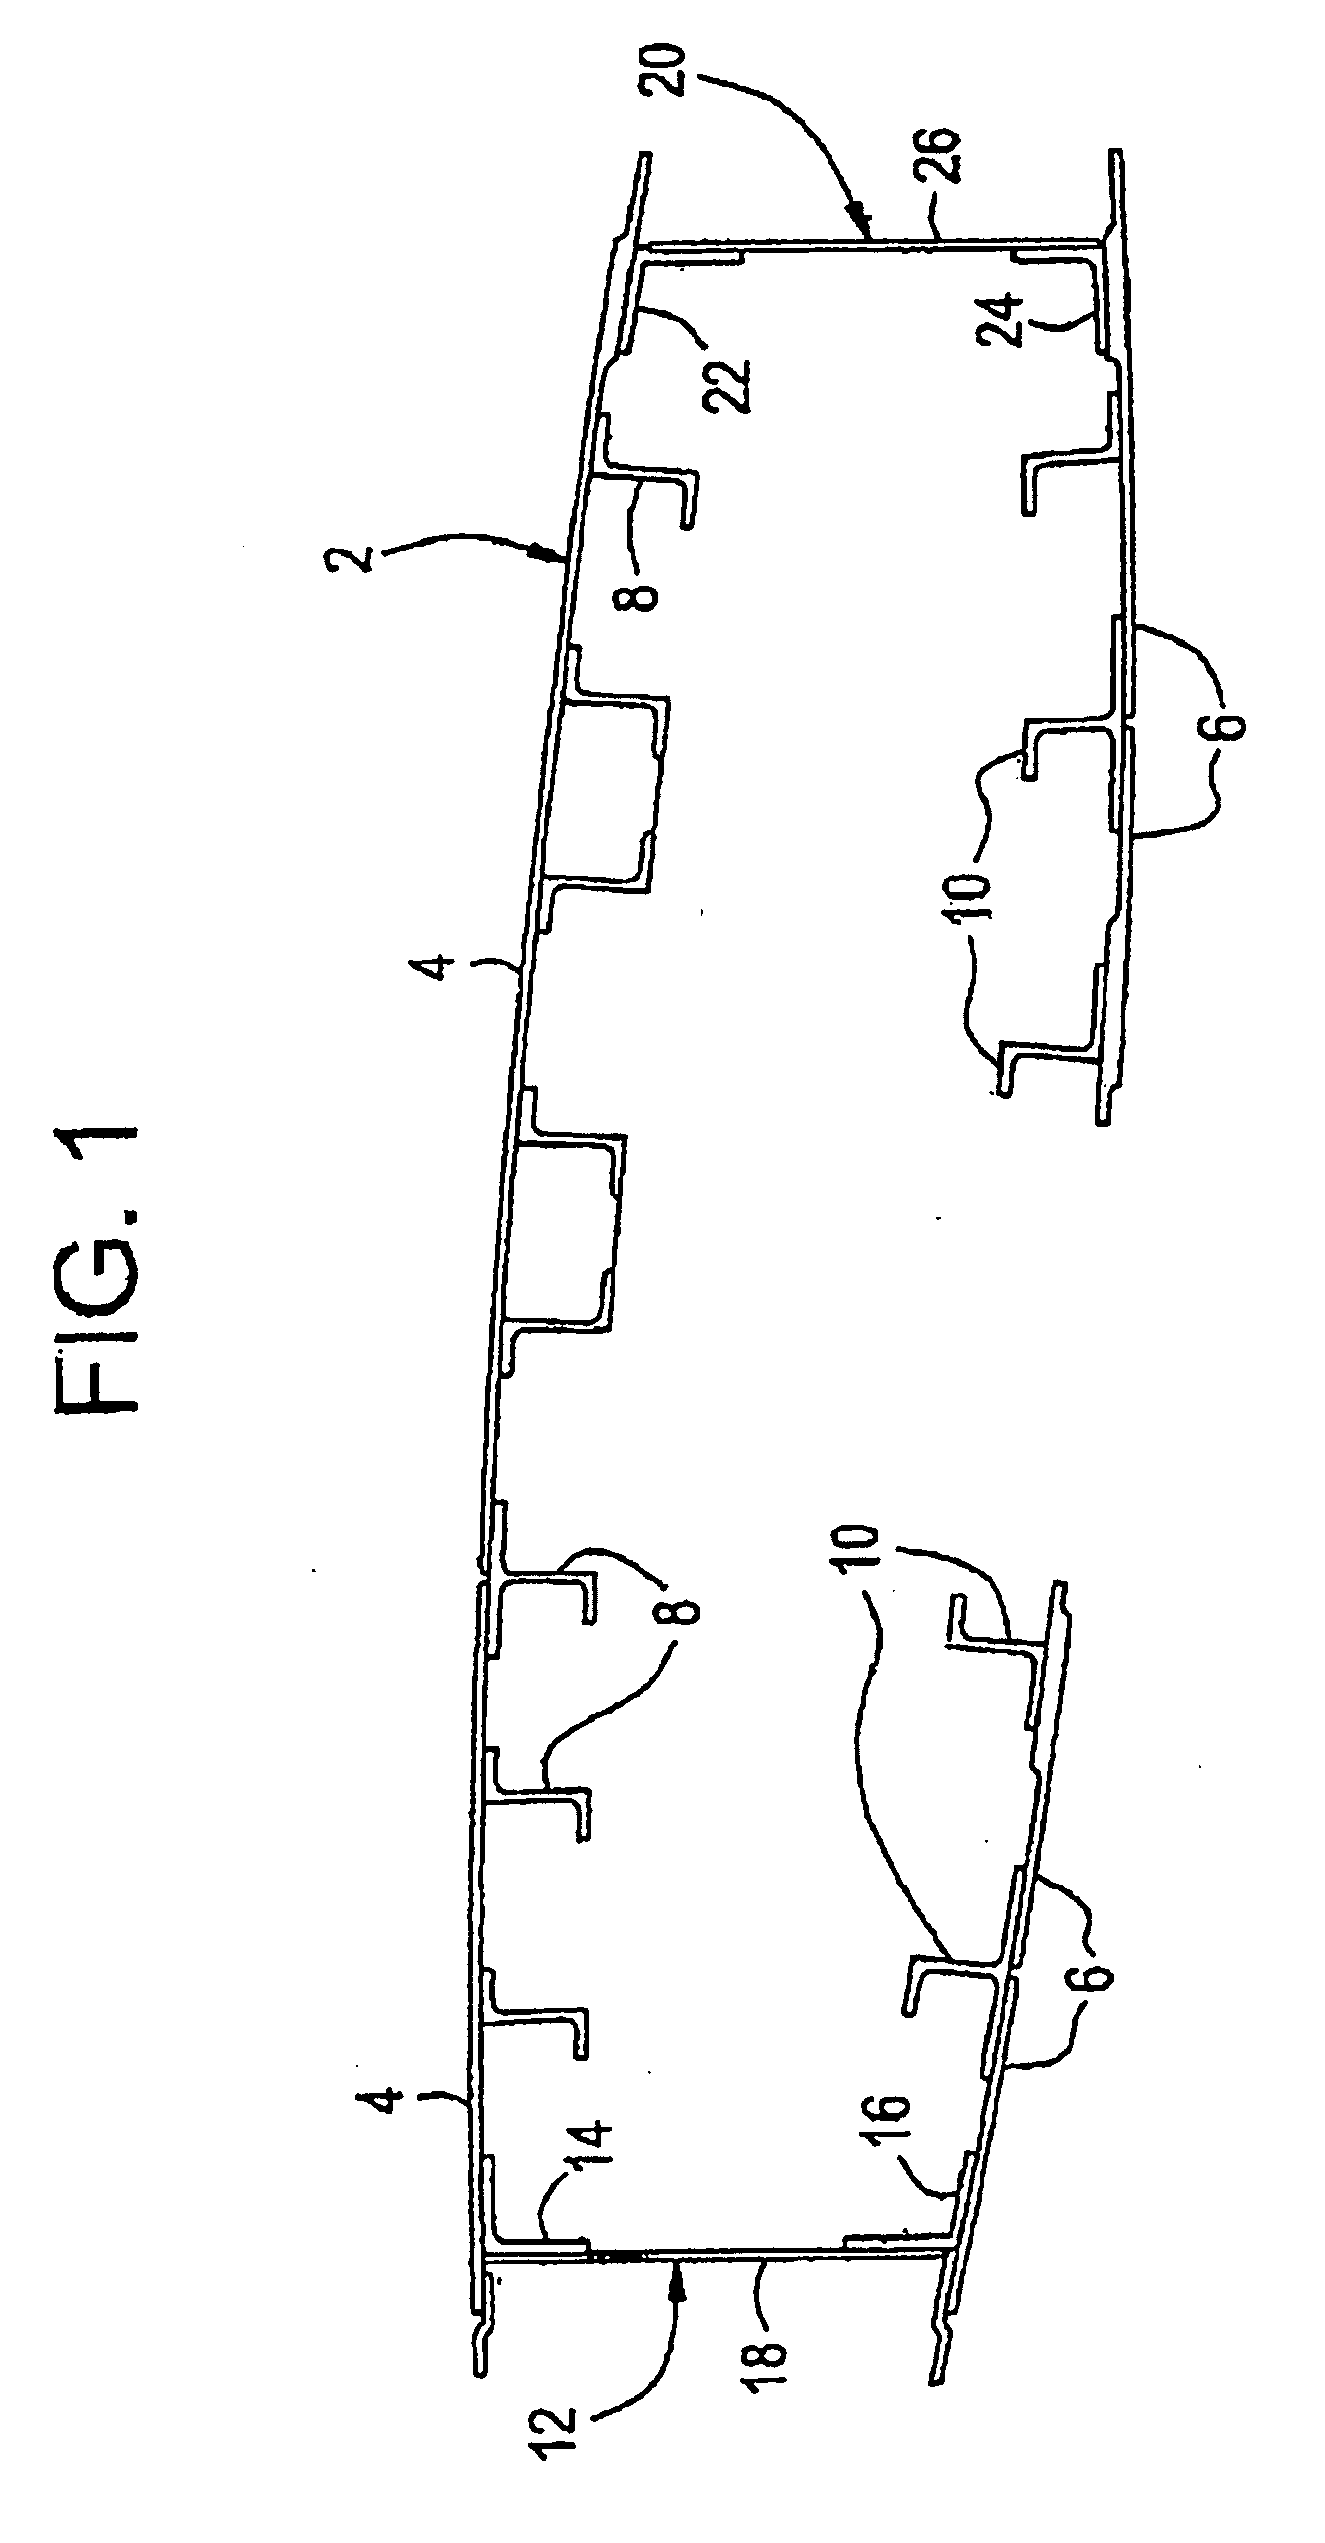 Aluminum alloy products having improved property combinations and method for artificially aging same